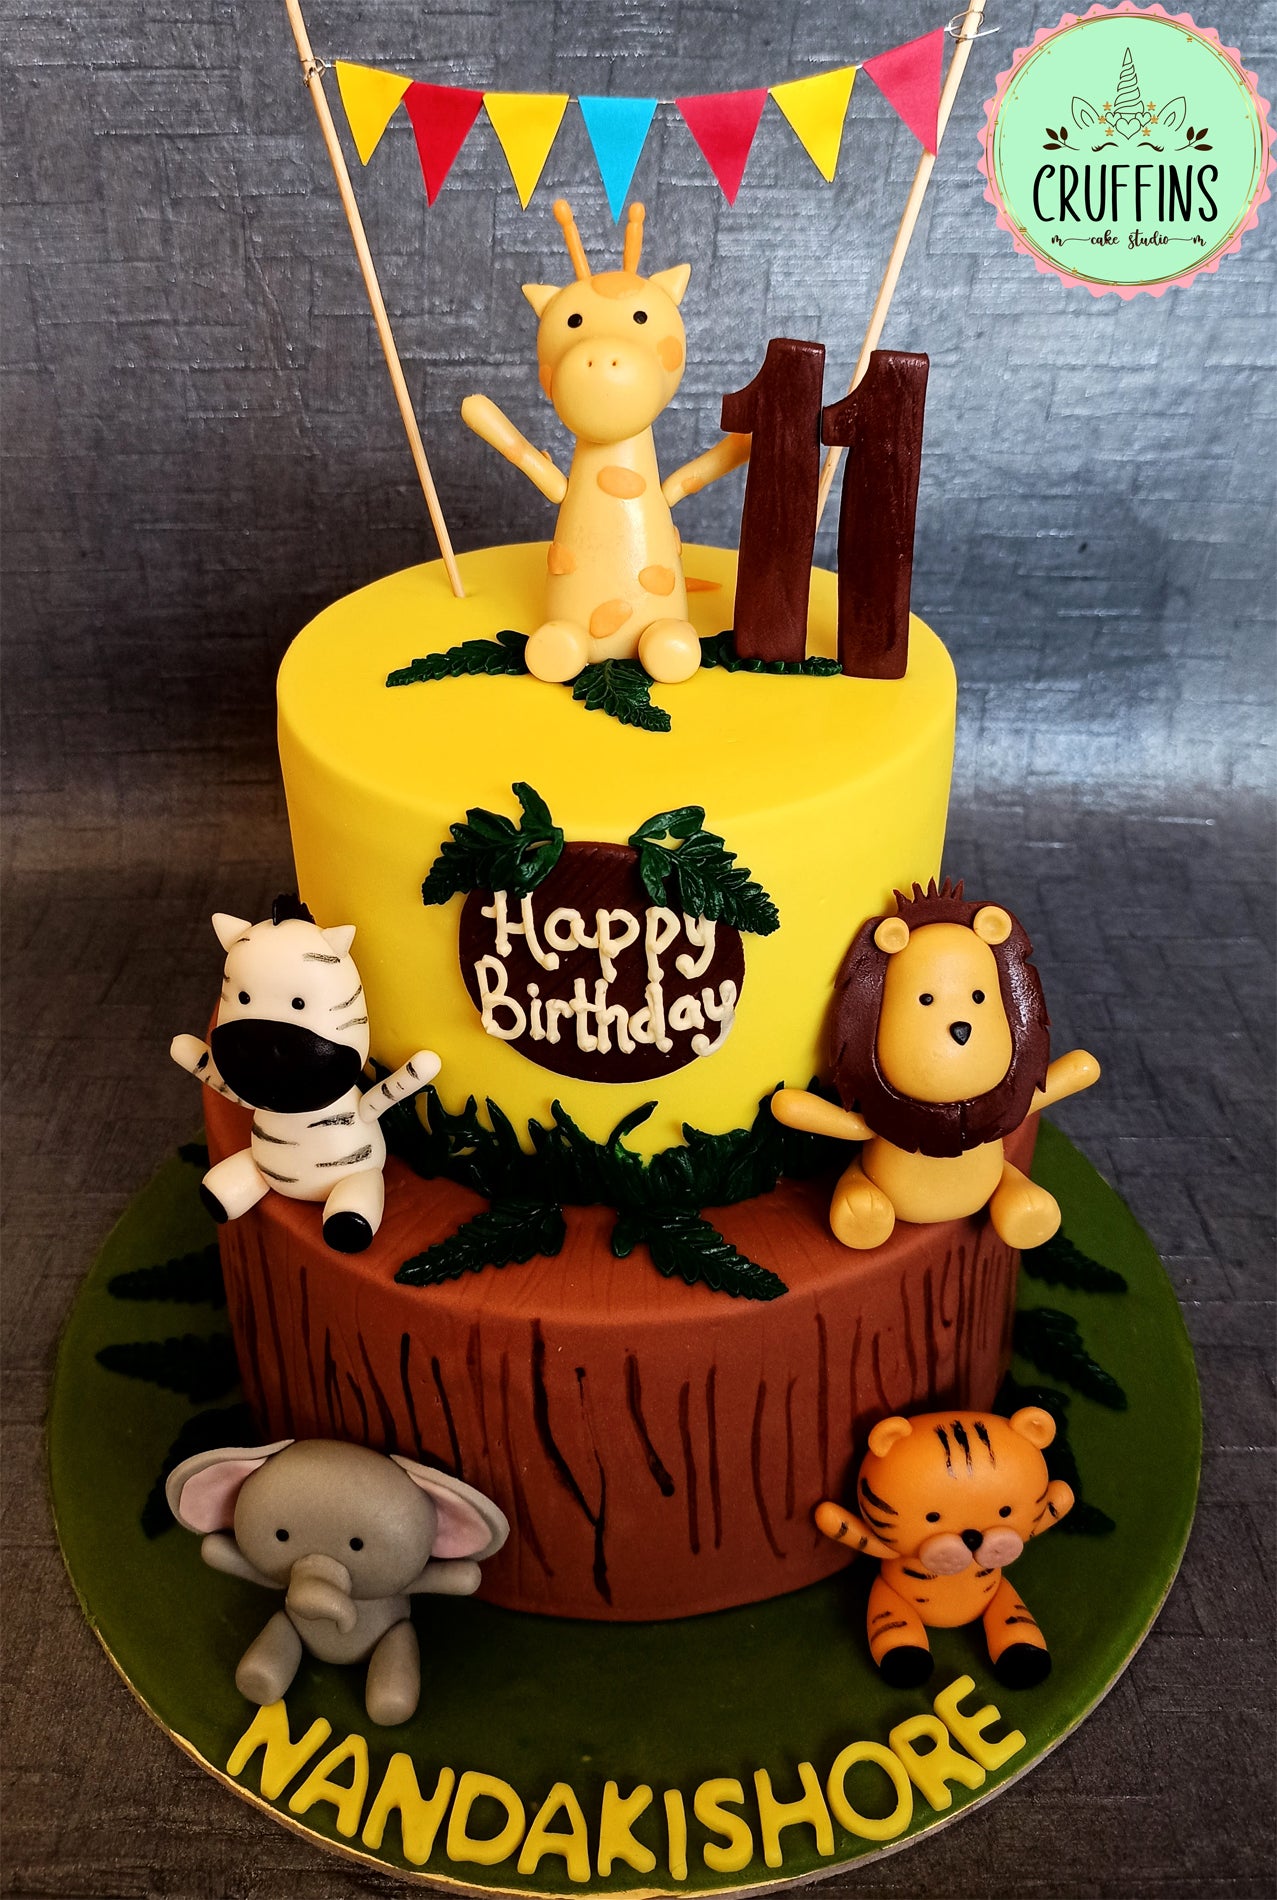 Mel's Amazing Cakes - Flintshire - Rustic buttercream 1st birthday cake for  Cody with a jungle theme and fondant animals .#1stbirthdaycake #1stbirthday  #babycakes #junglecake #childrenscakes #melsamazingcakes #northwalescakes  #chestercakes | Facebook